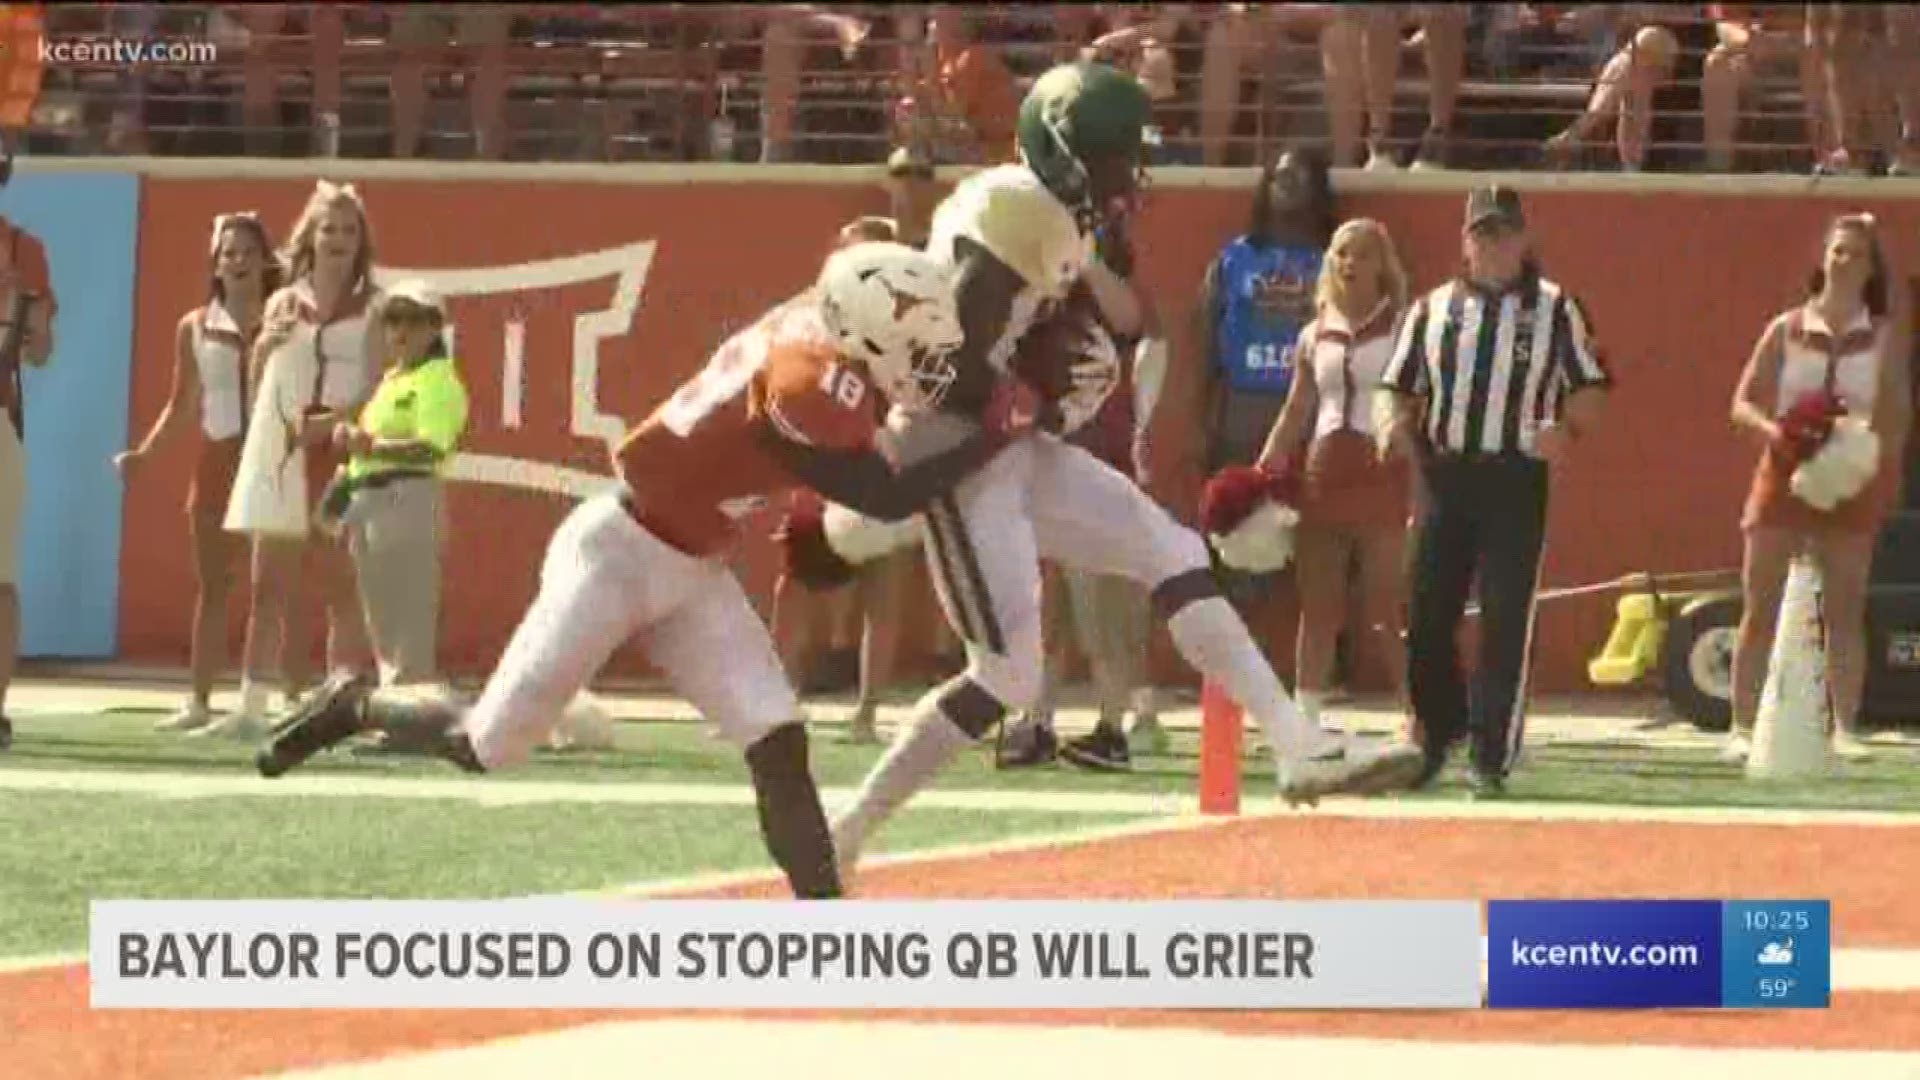 Baylor focused on stopping QB Will Grier